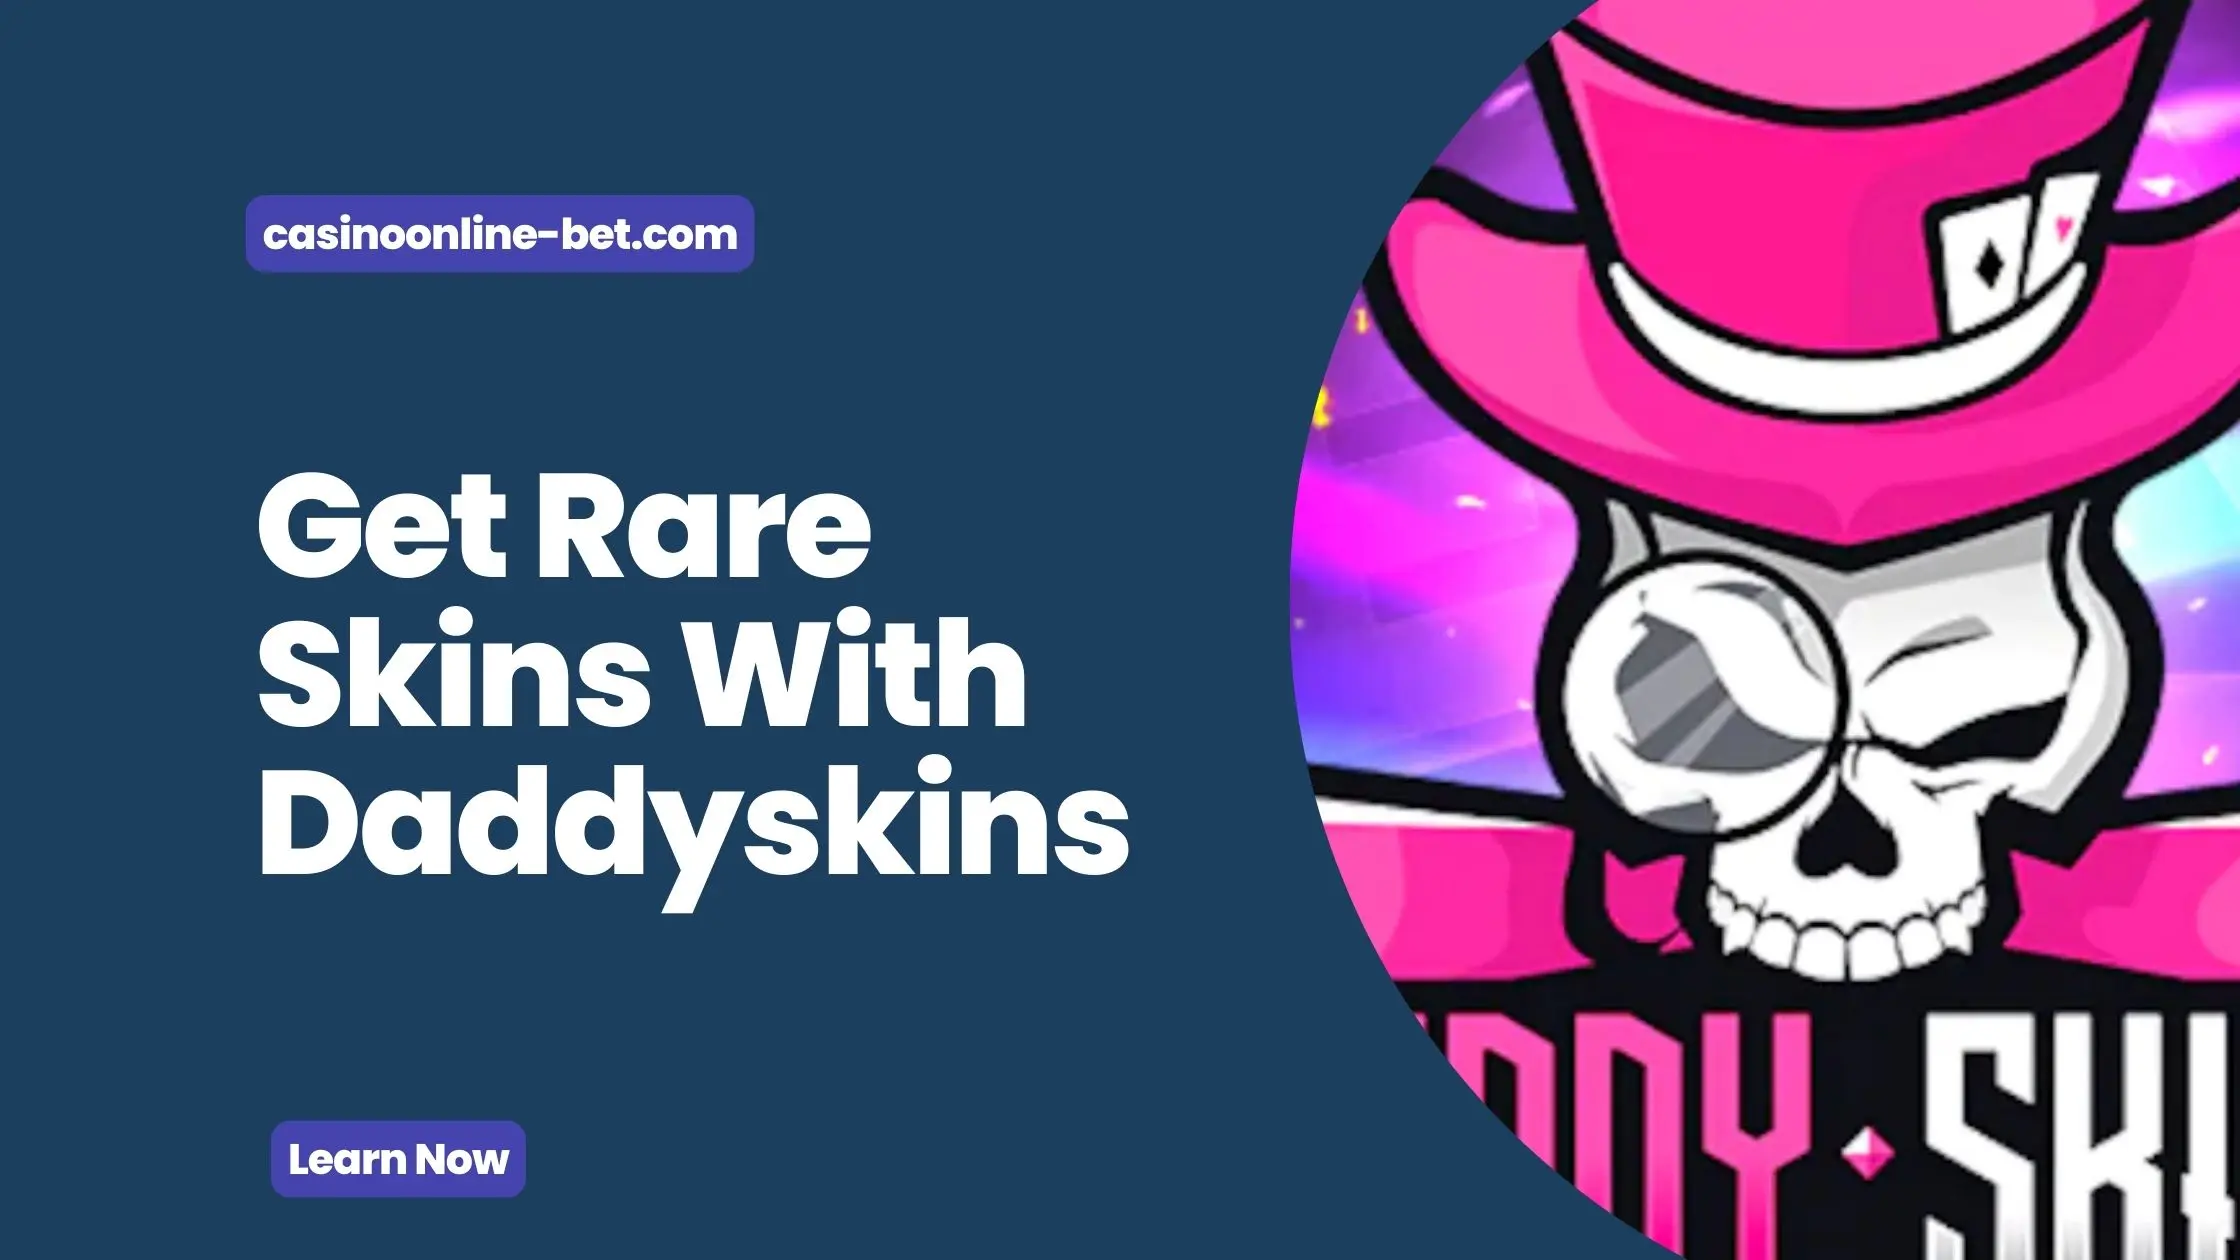 Get Rare Skins With Daddyskins